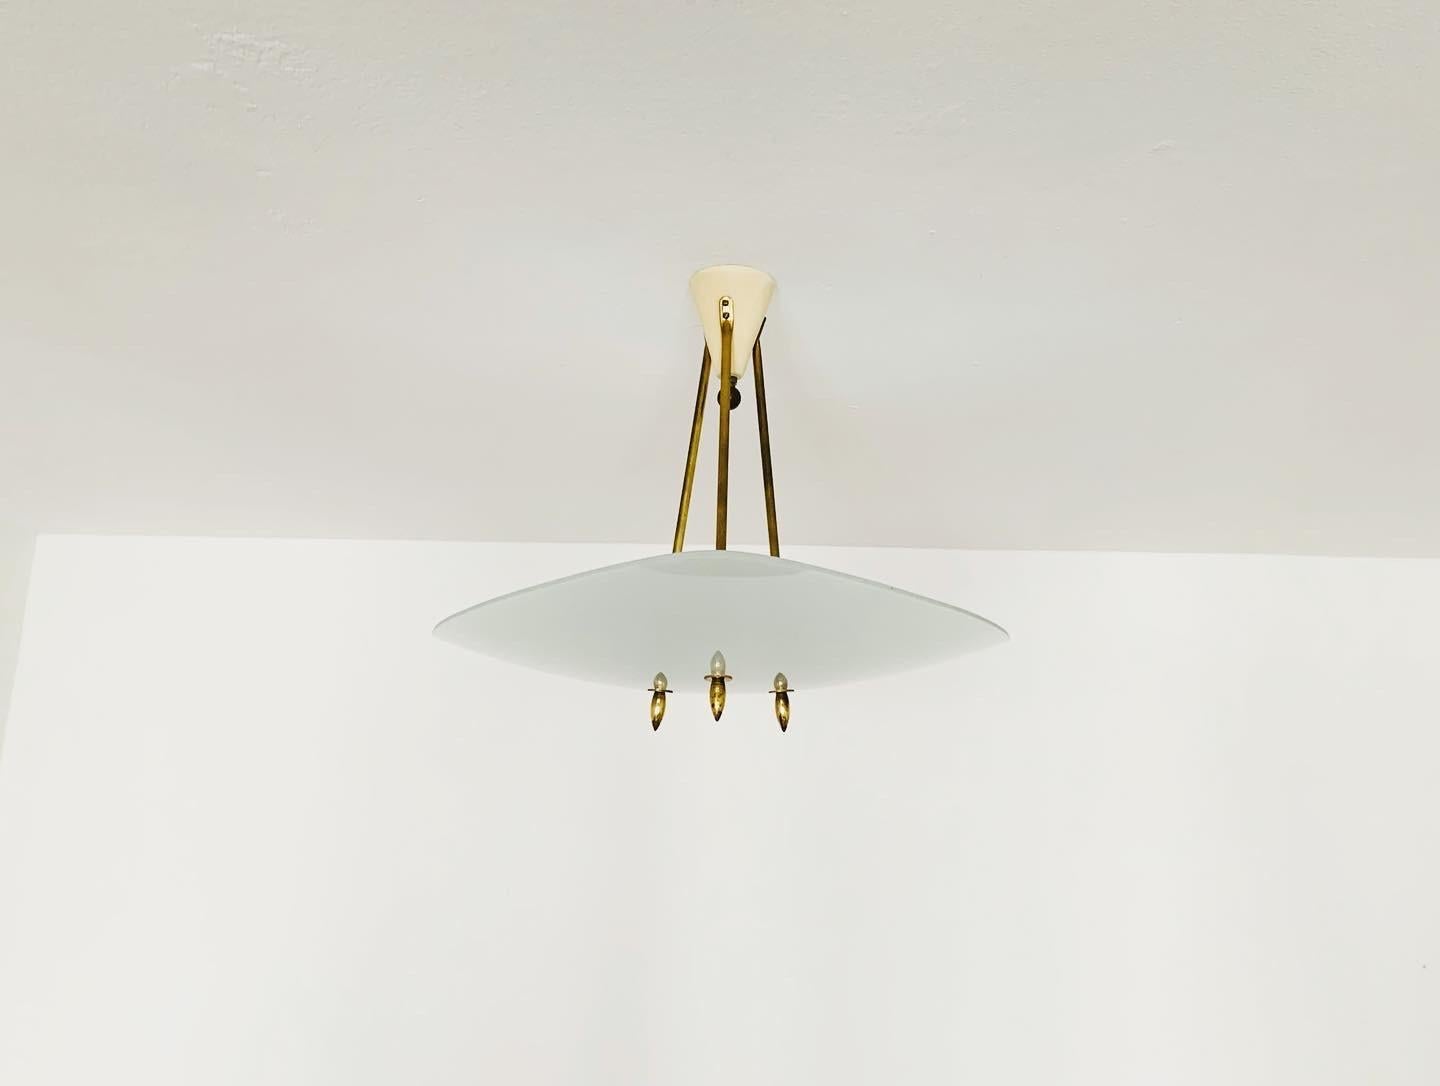 Exceptionally beautiful ceiling lamp from the 1950s.
Very fine and beautiful design which fits wonderfully into any room.
A very noble light is created.

Condition:

Very good vintage condition with slight signs of wear consistent with